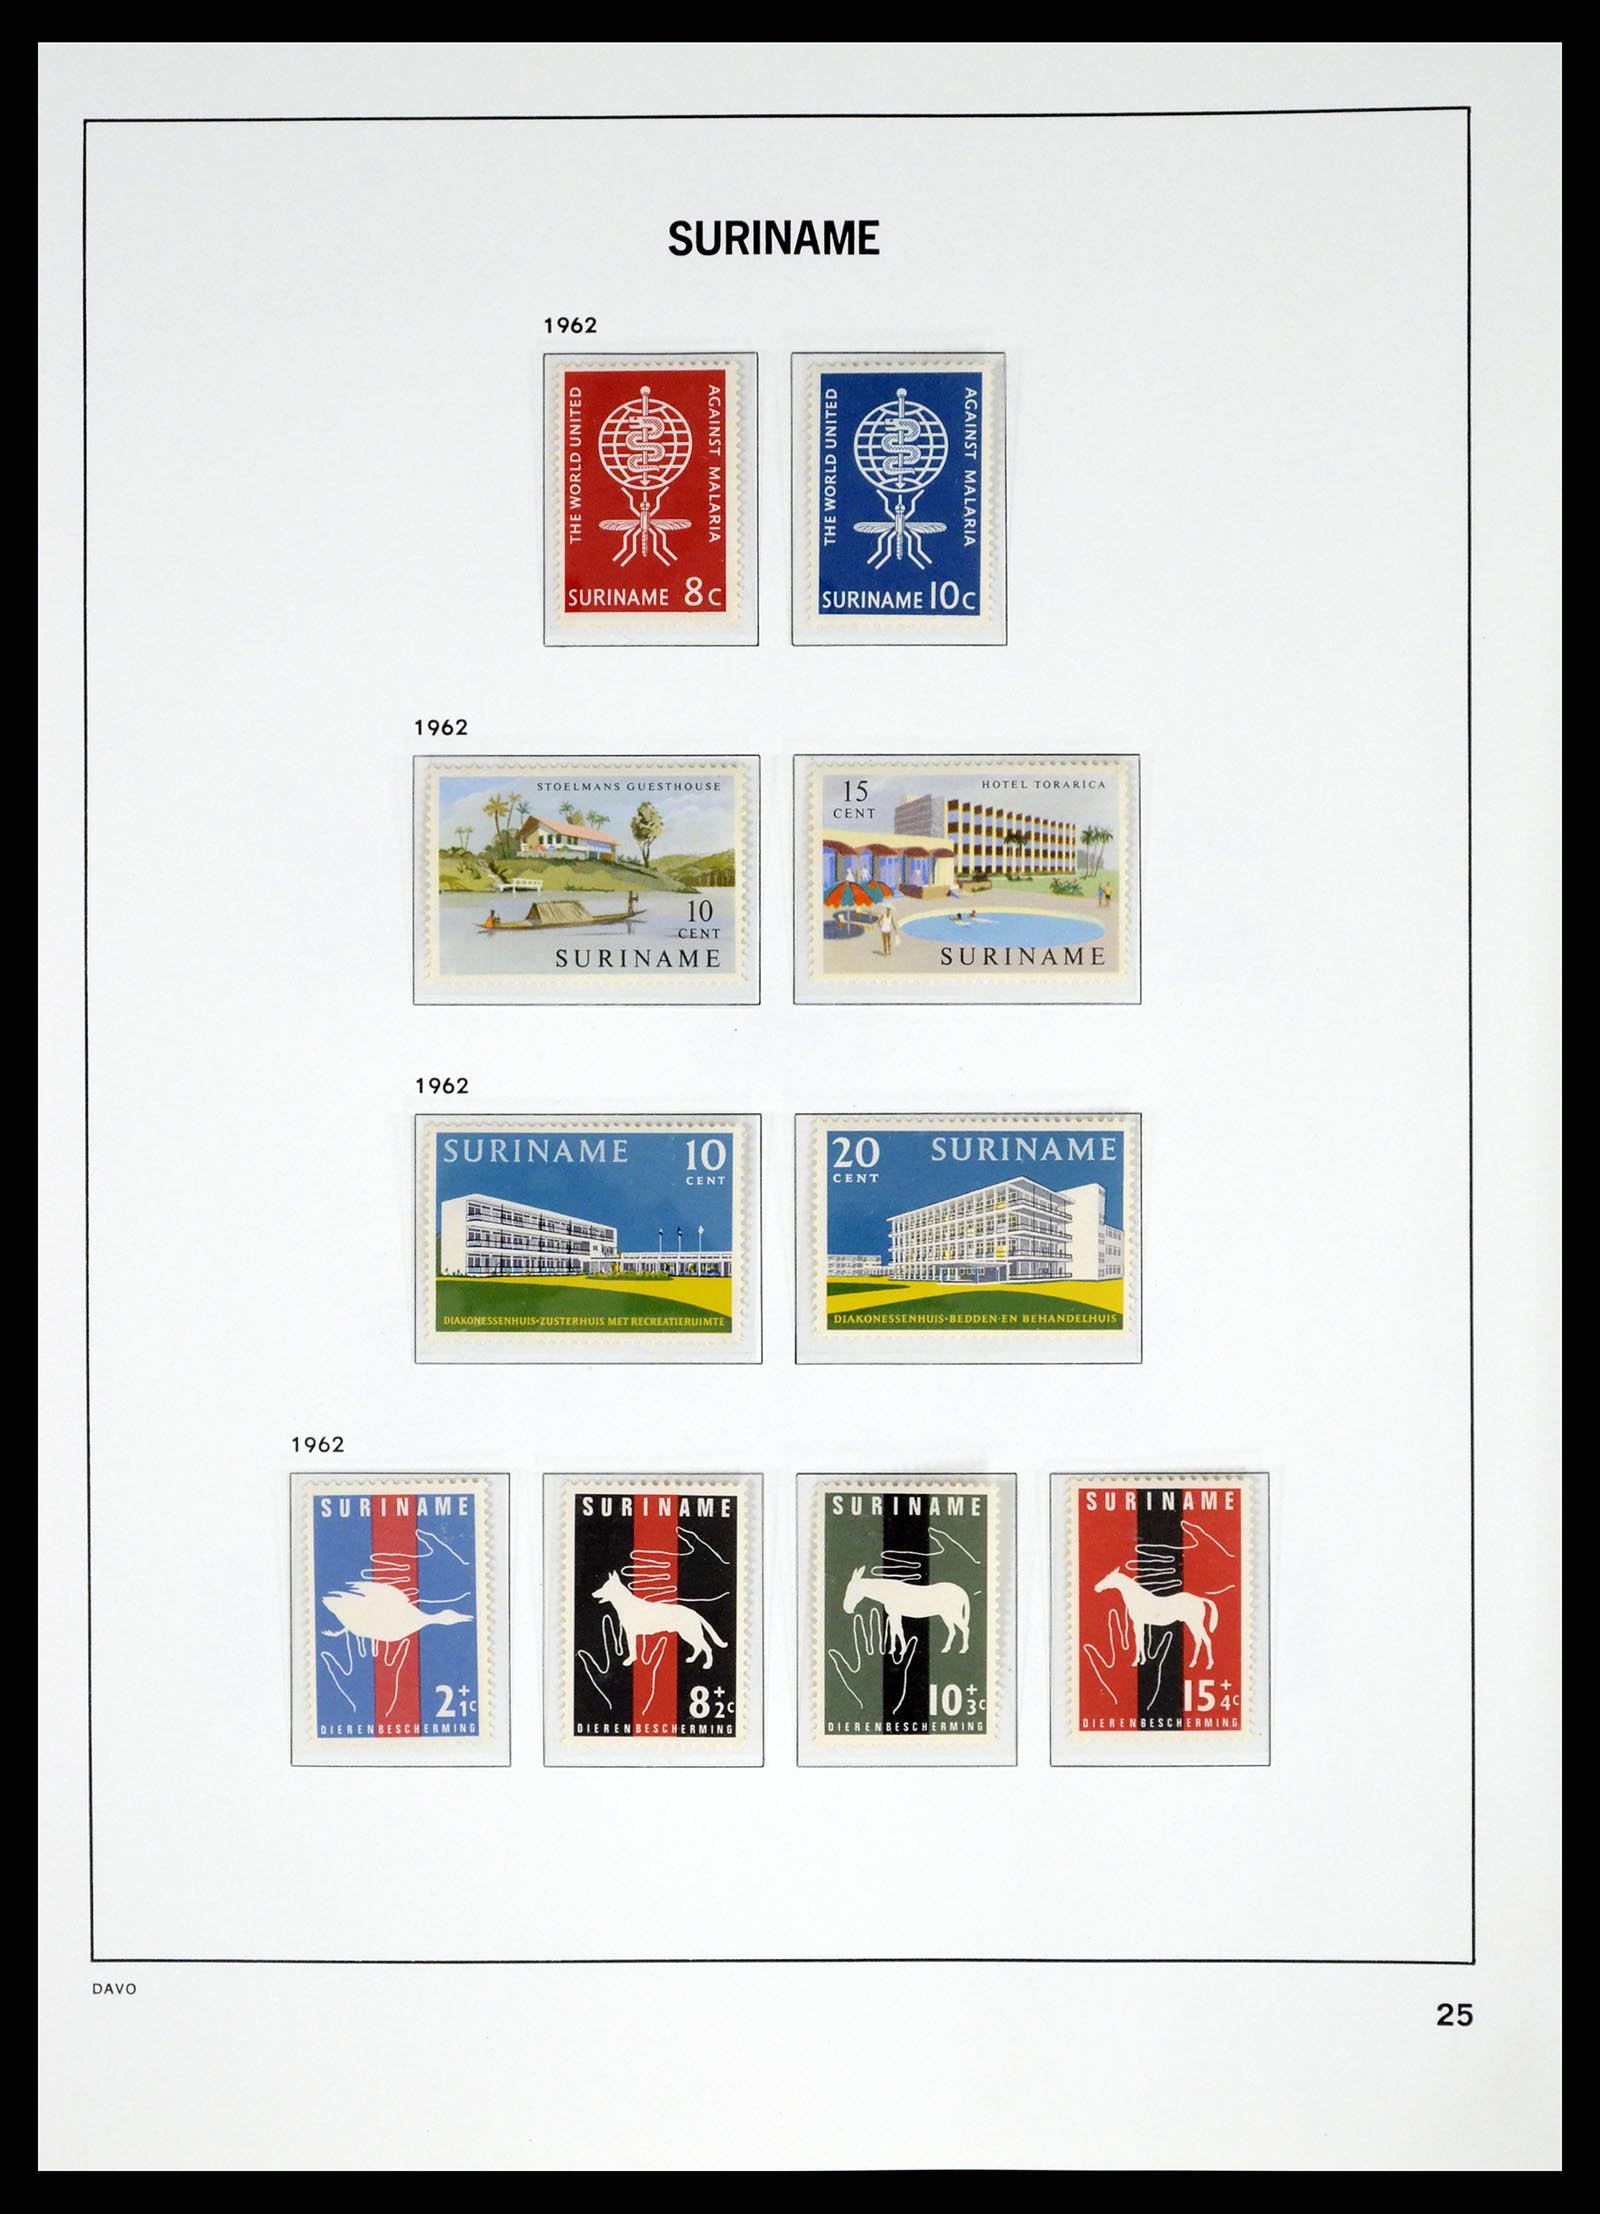 37421 027 - Stamp collection 37421 Suriname 1873-1975.